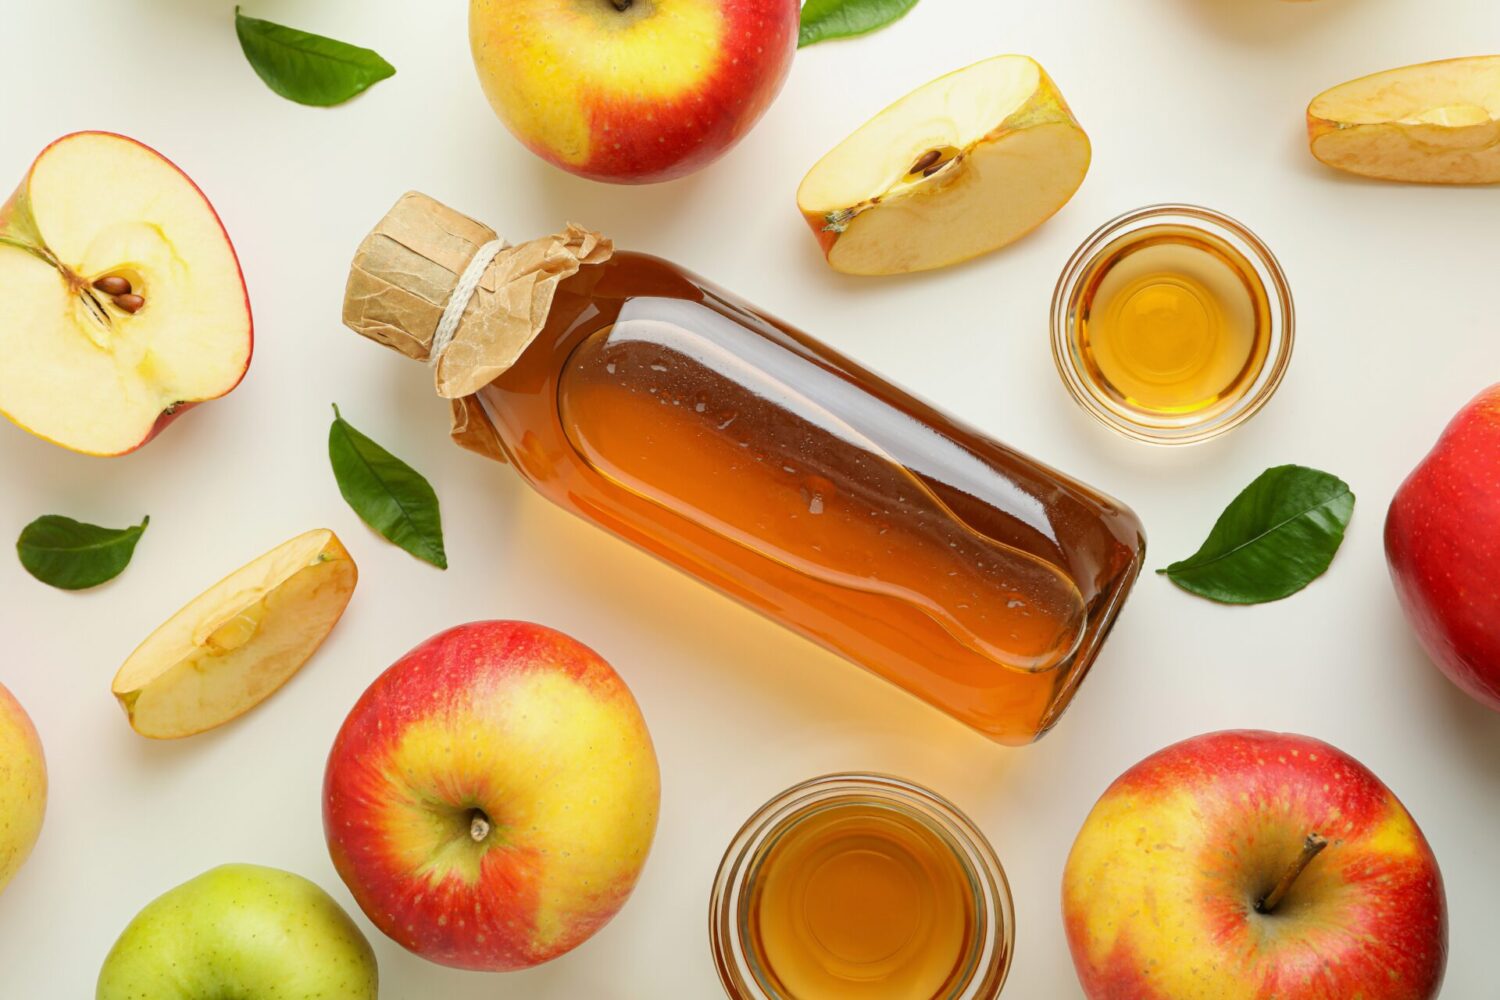  Apple cider vinegar: what’s the fuss? by Goodhealth